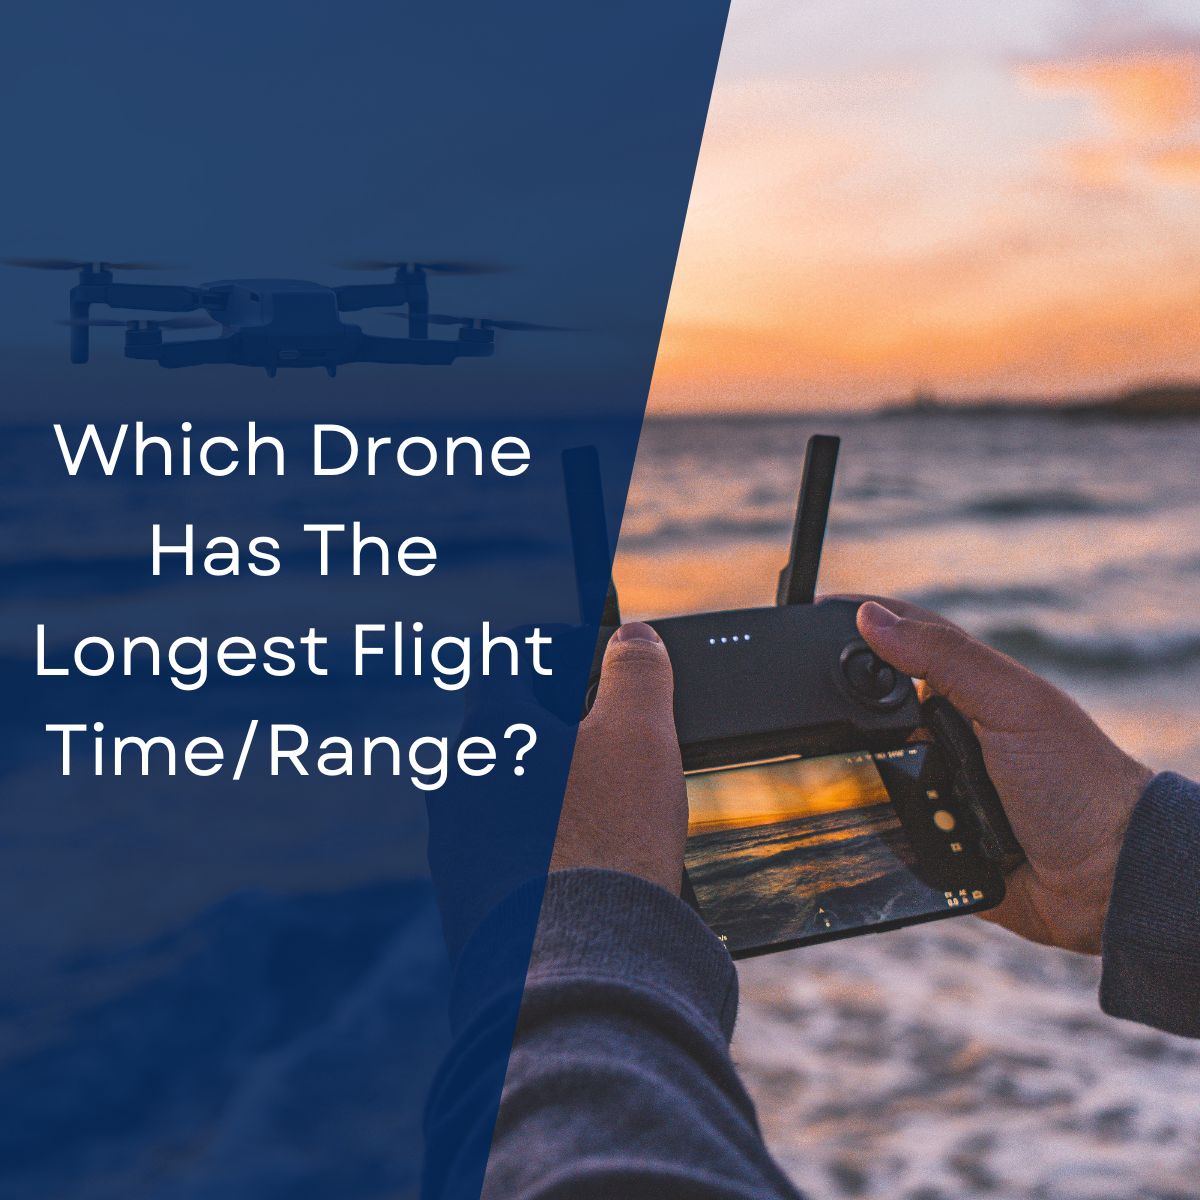 Which Drone Has The Longest Flight Time/Range?